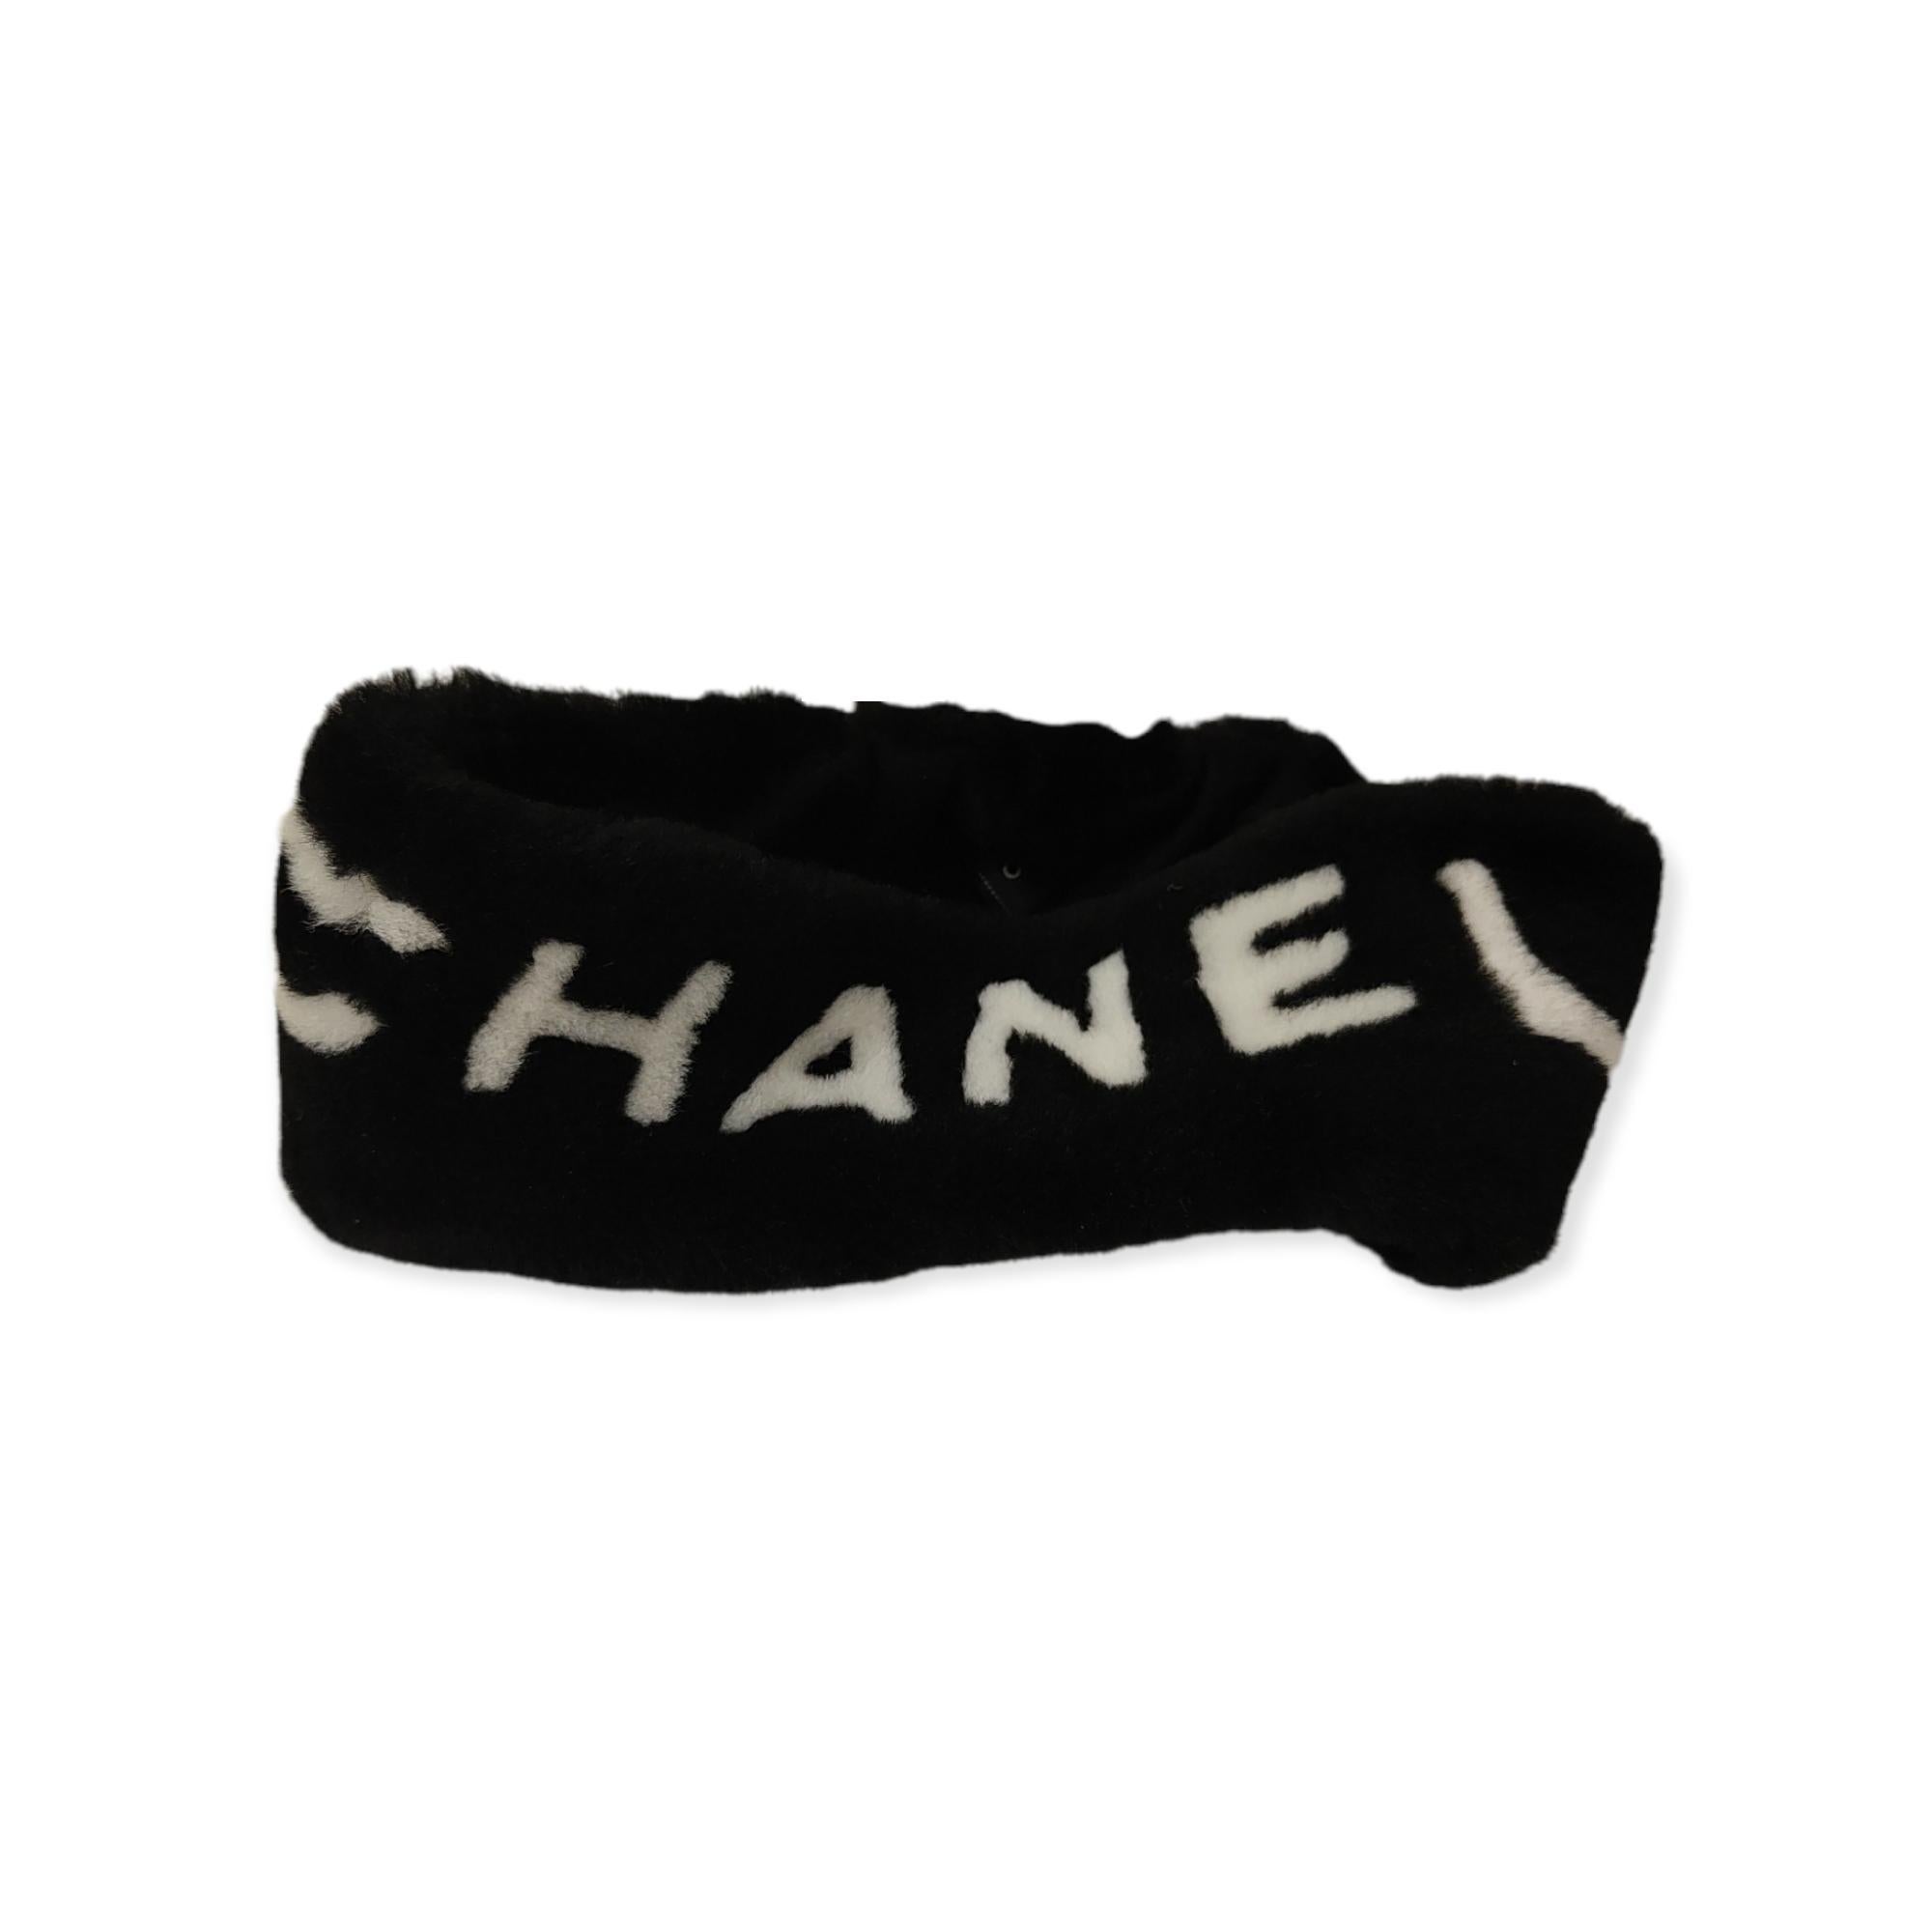 Headband or neck warmer chanel sheepskin and cashmere no composition label and size reported length 26 cm 
Estimated size M
Excellent condition